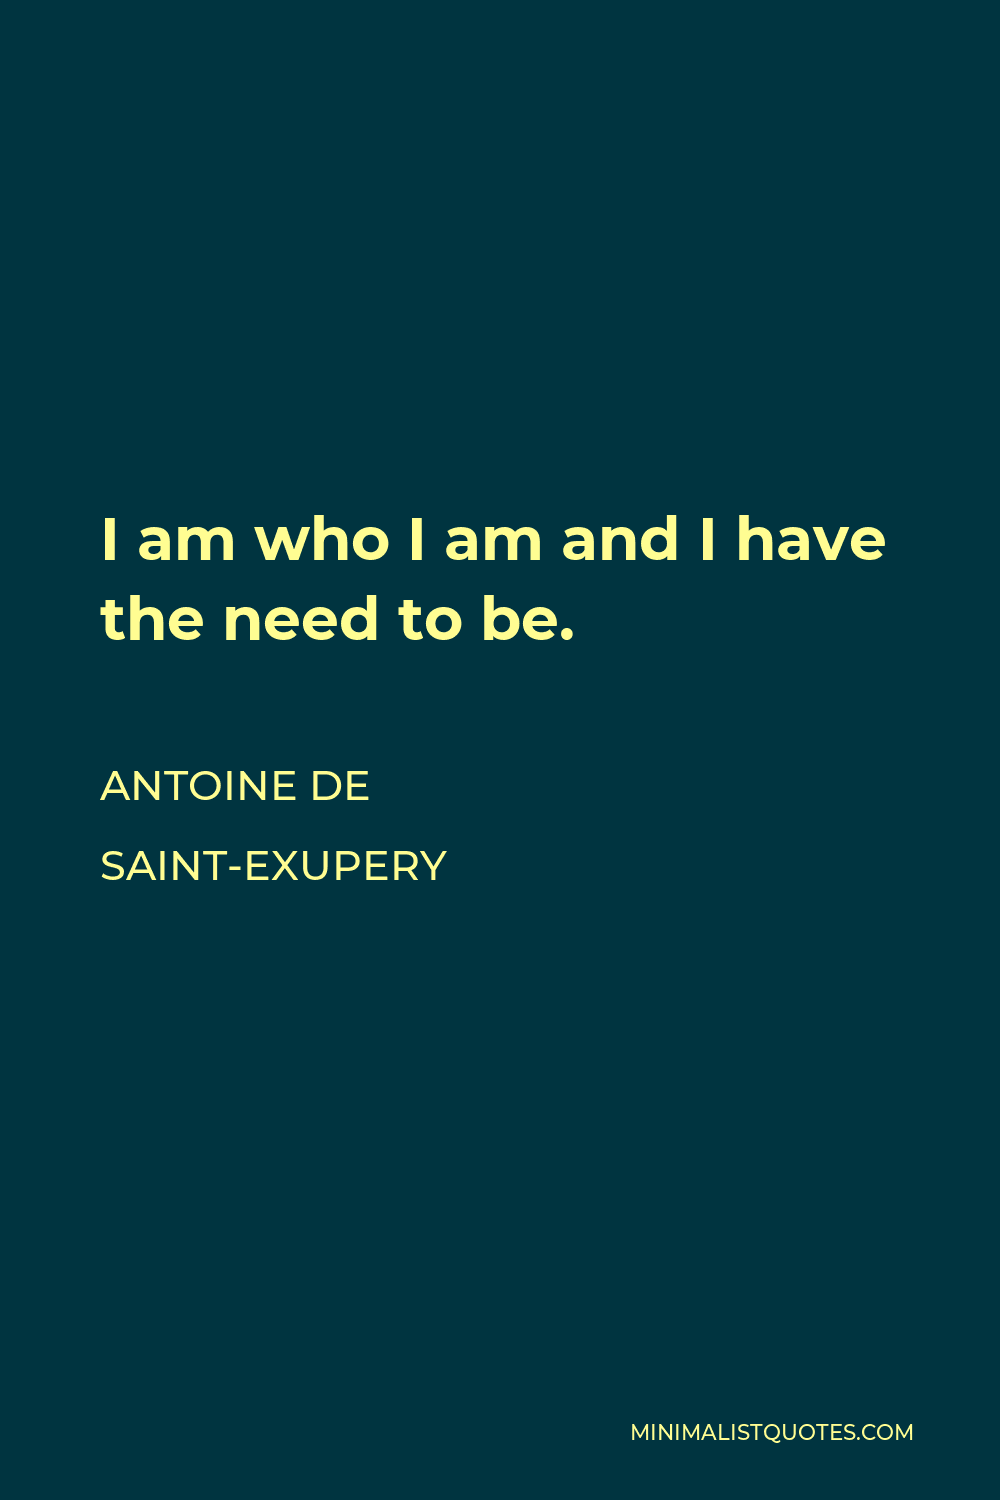 Antoine de Saint-Exupery Quote - I am who I am and I have the need to be.